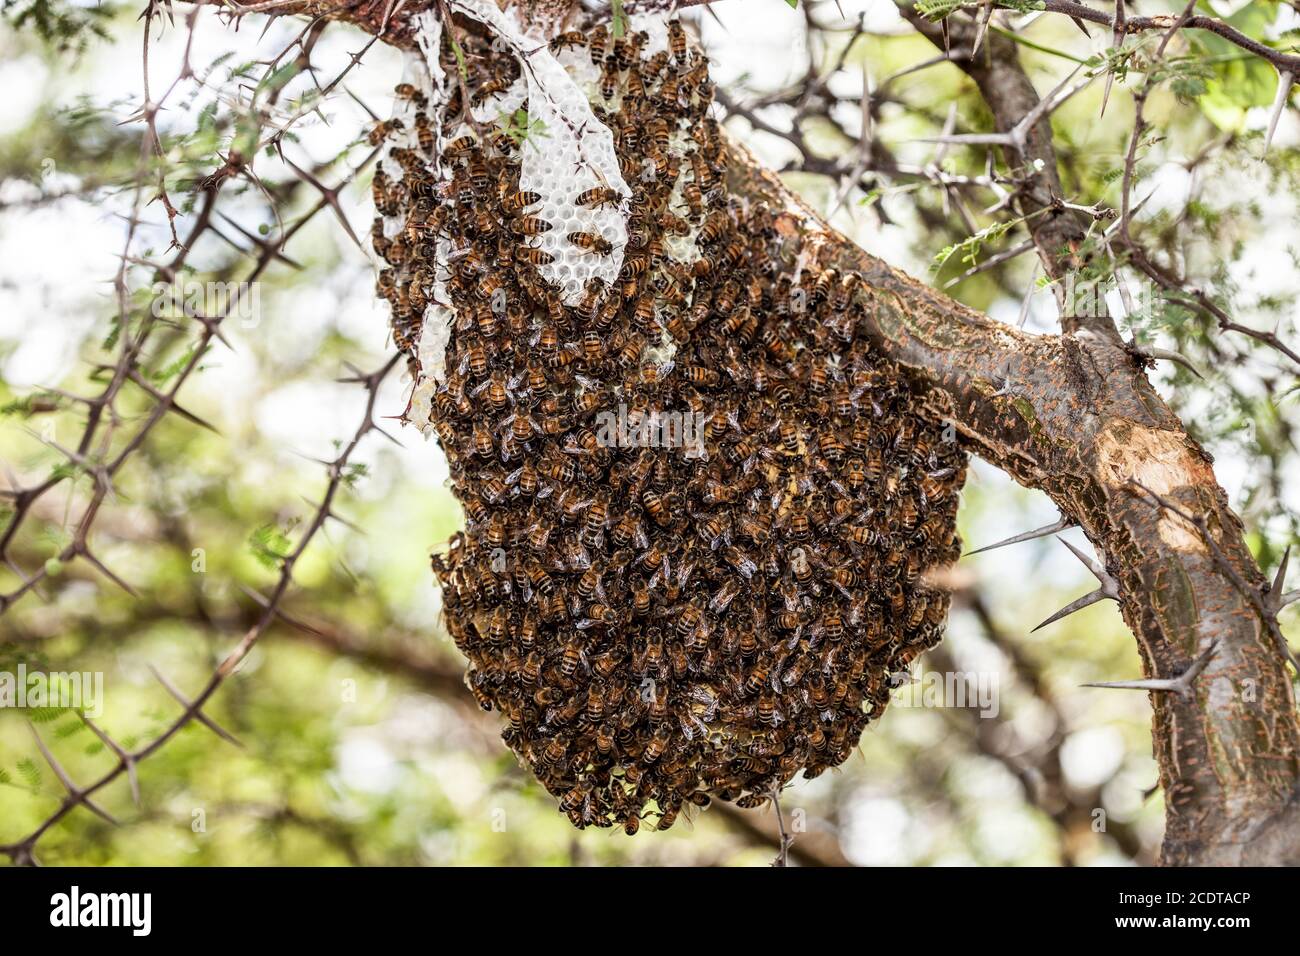 A colony of wild or escaped Africanized bees Stock Photo